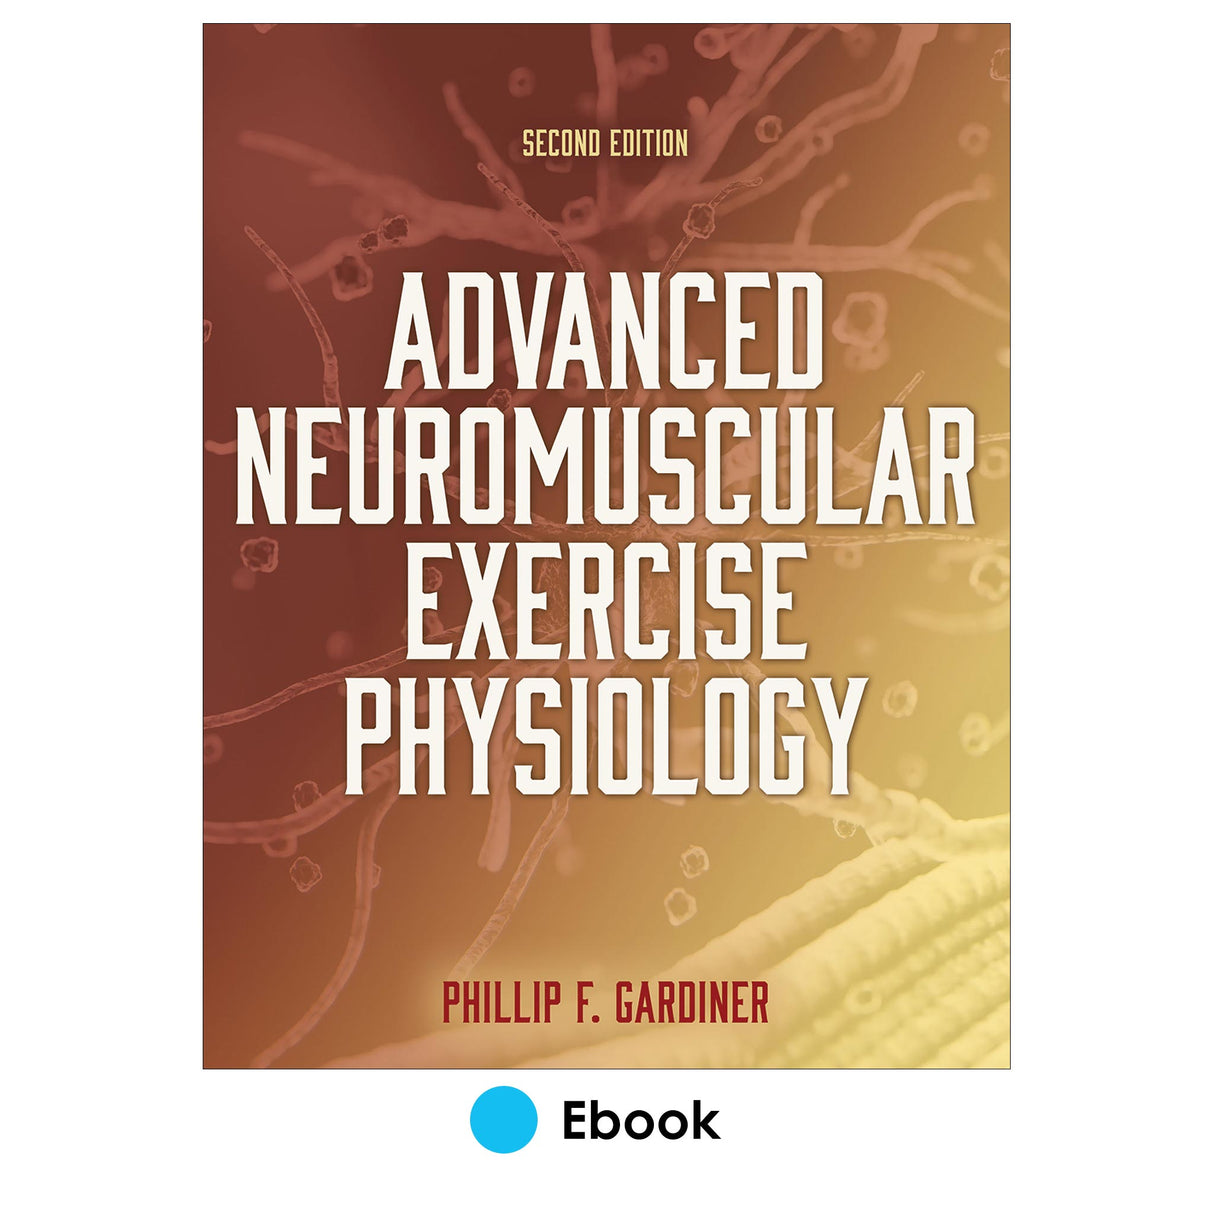 Advanced Neuromuscular Exercise Physiology 2nd Edition epub